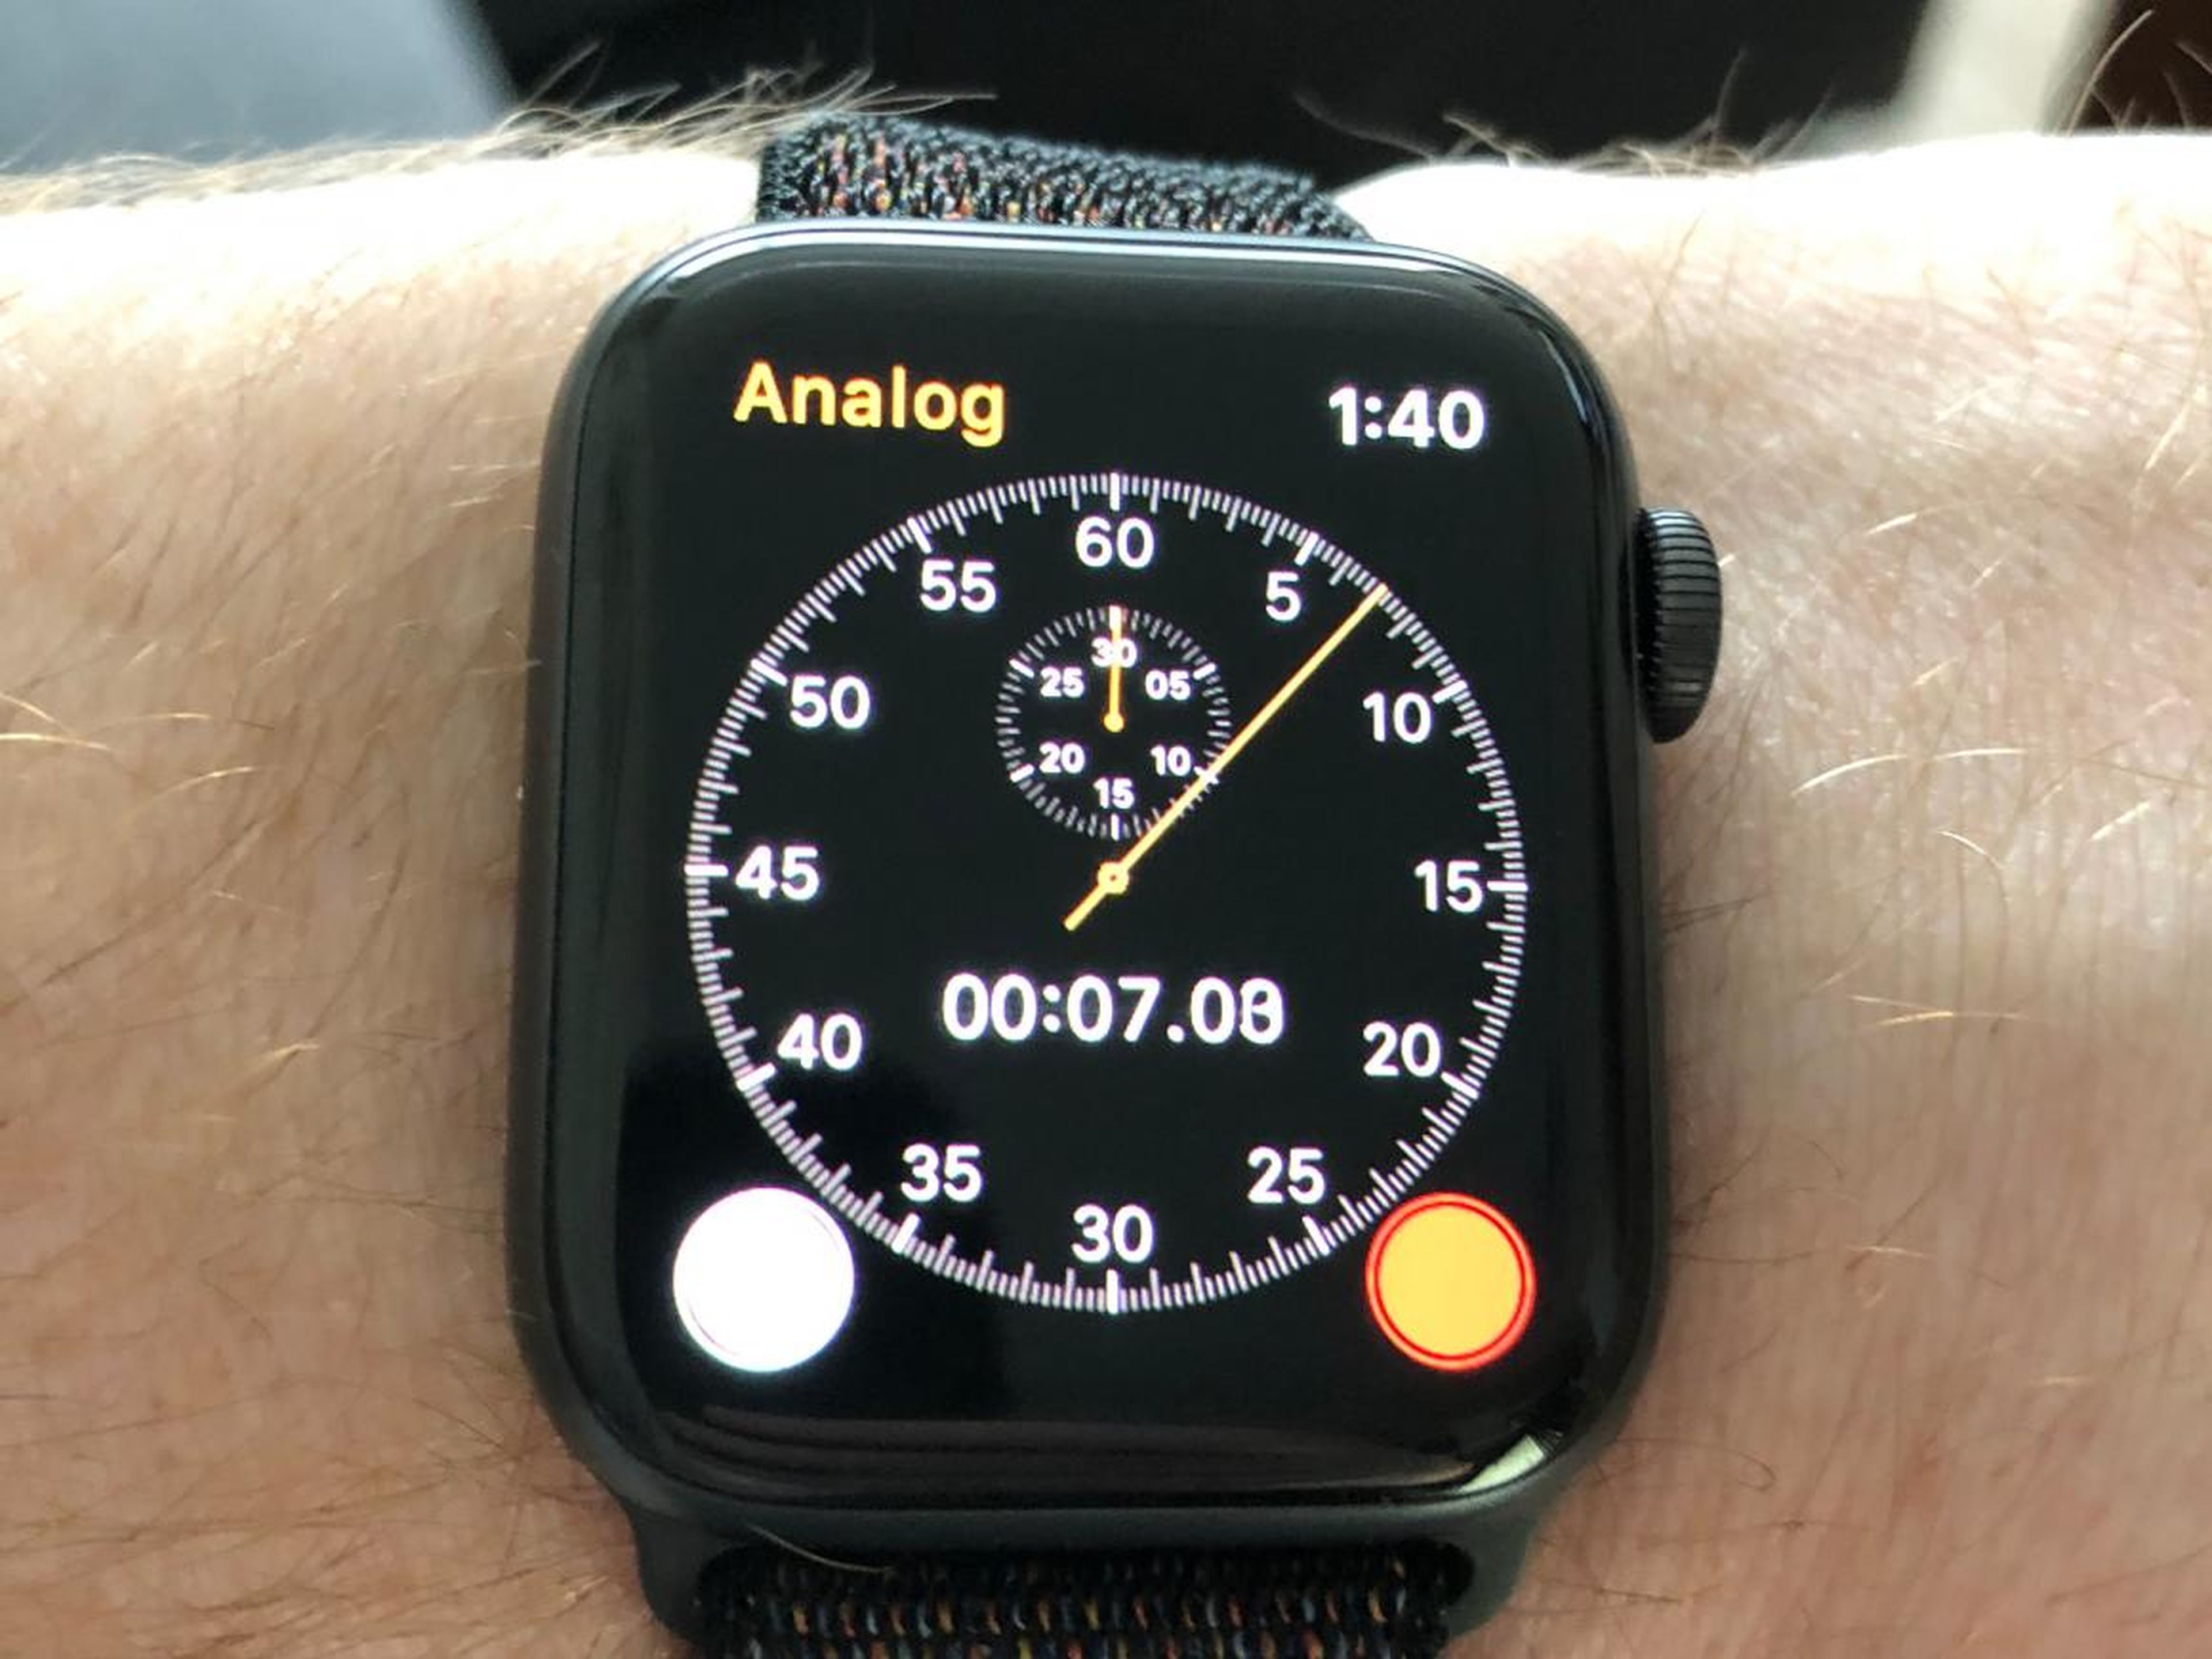 17. This may shock you, but the Apple Watch is pretty dang good at being a stopwatch.